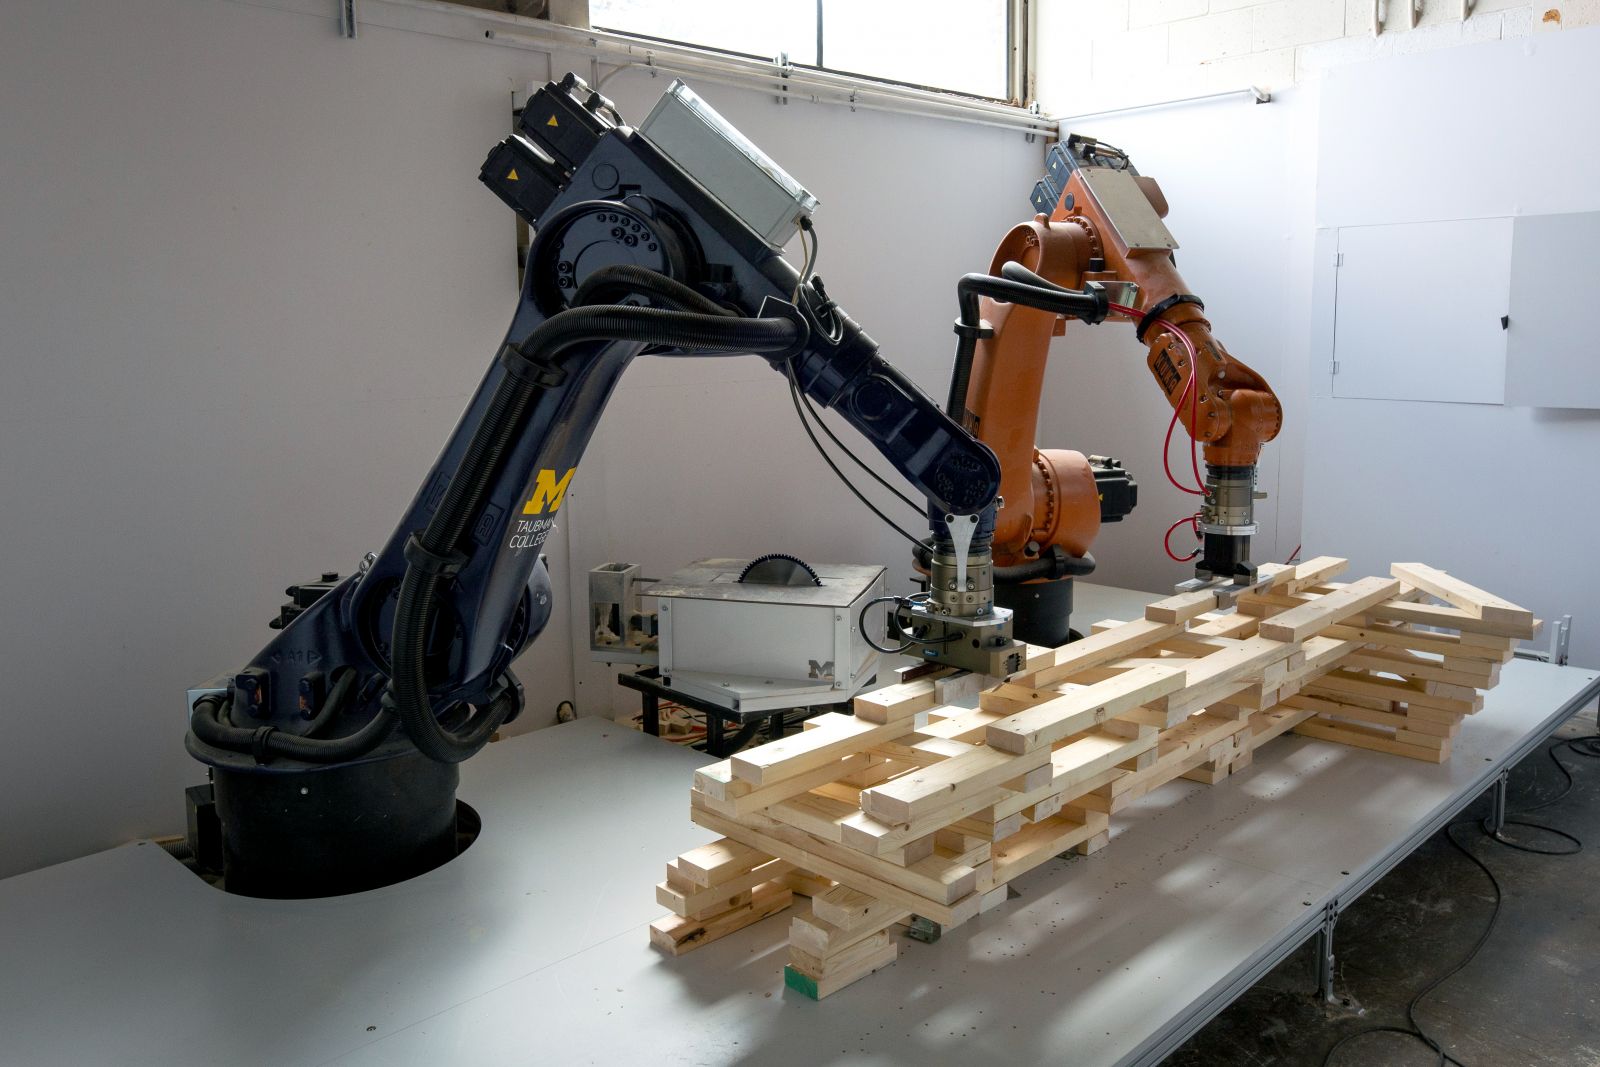 Image of two robotic arms assembling a wooden structure.